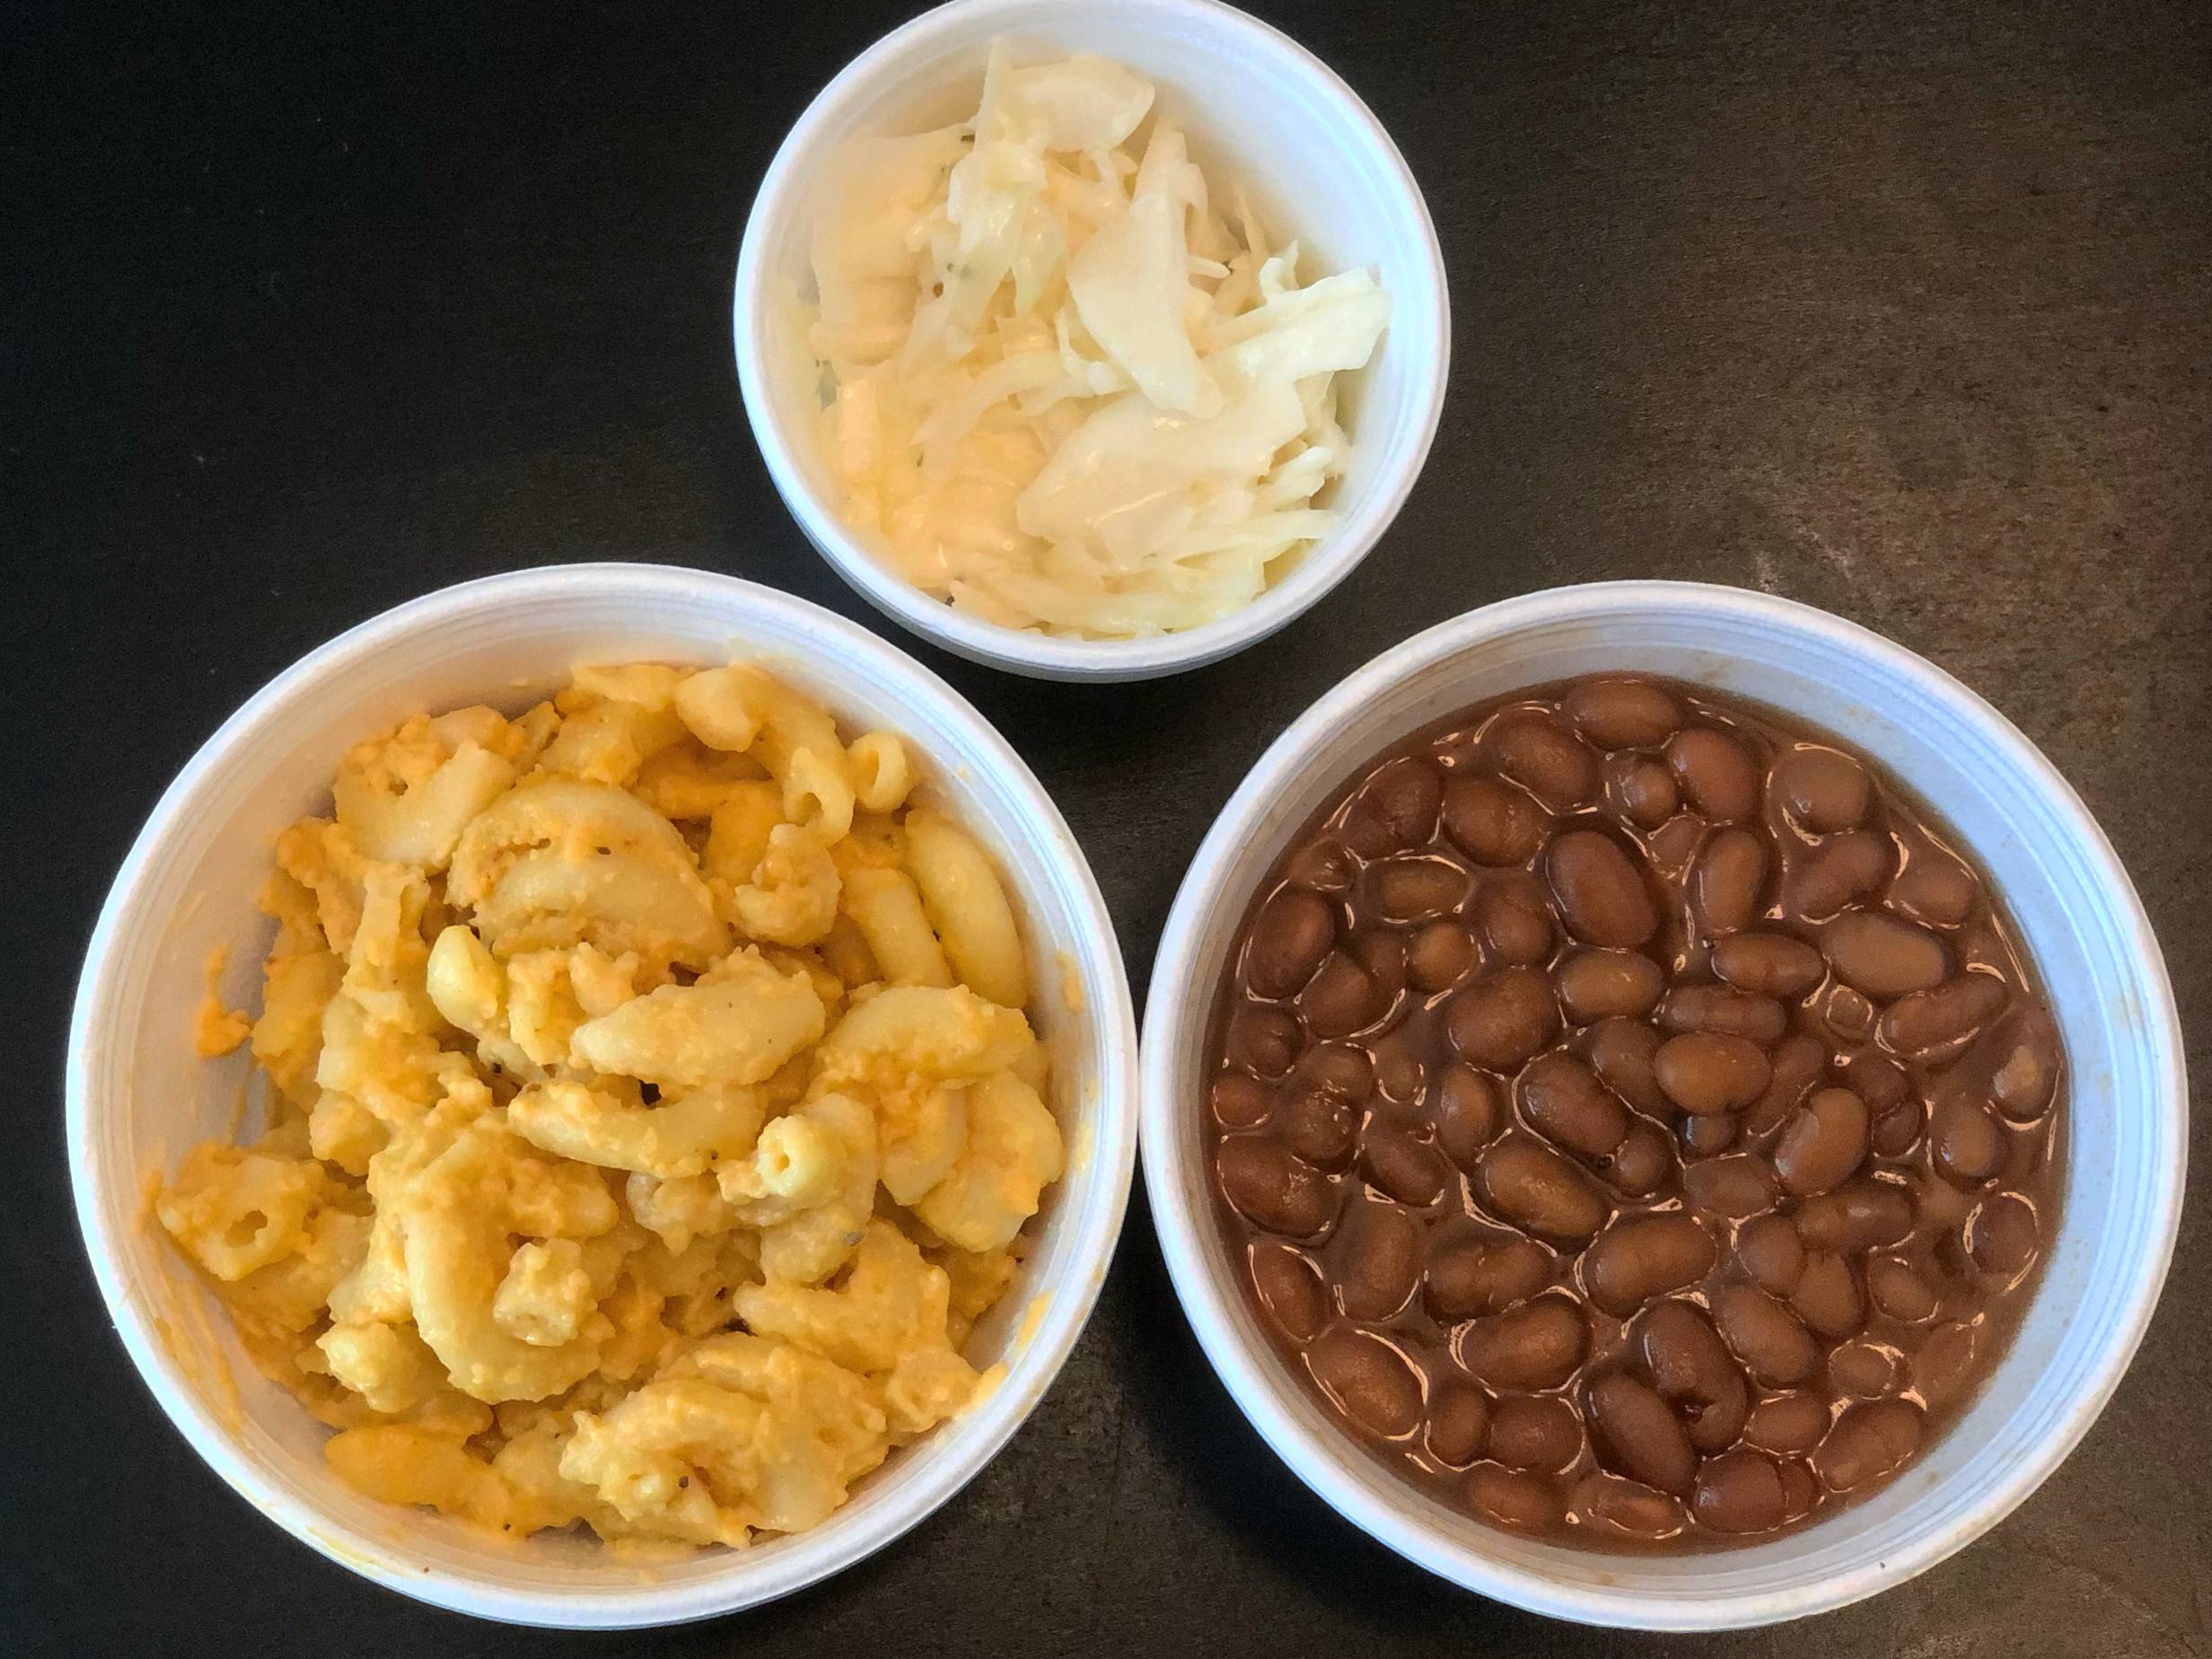 Three white styrofoam containers are open and shot from overhead: a small coleslaw with white cabbage is up top, macaroni on the left, and baked beans on the right. Photo by Alyssa Buckley.